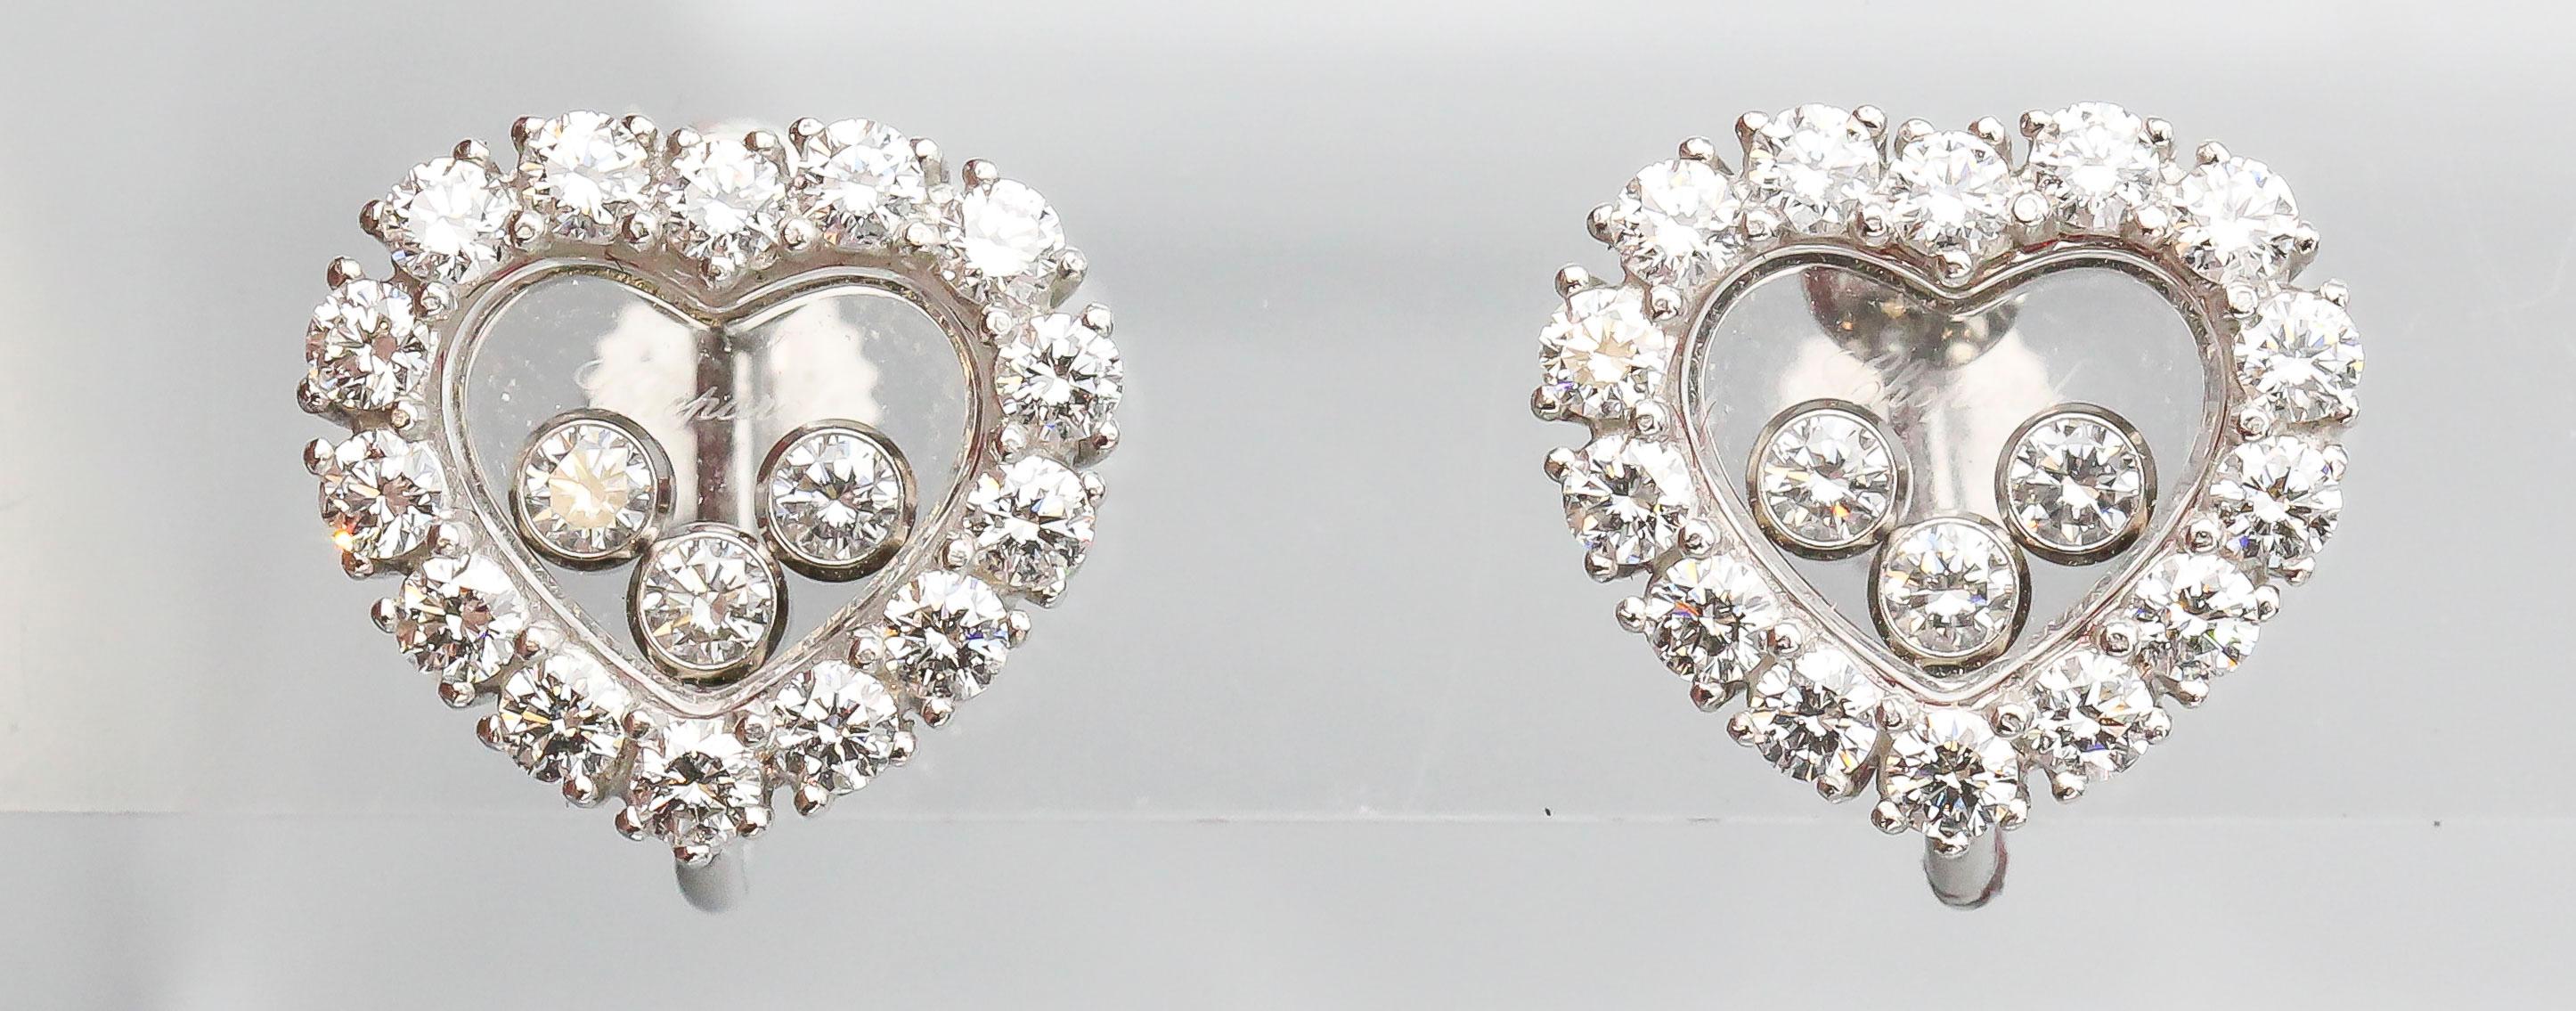 Fine 18K white gold and diamond earrings from the 